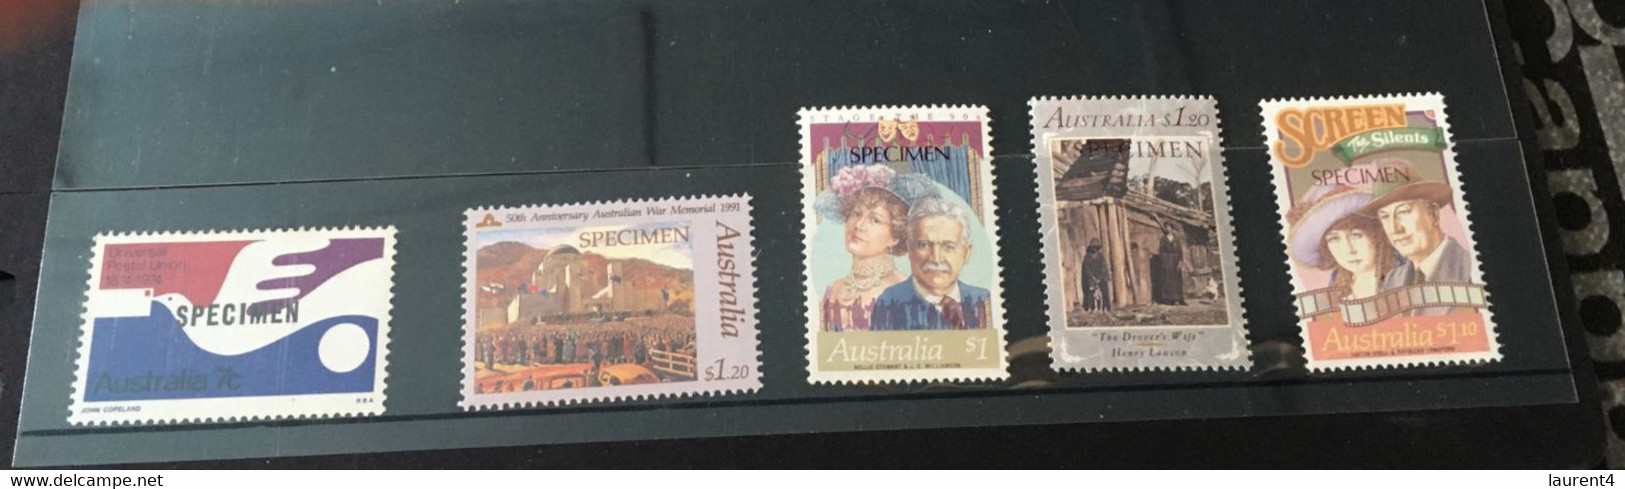 (Stamps 08-03-2021) Selection Of 5 High Values Issues Of SPECIMEN Stamps From Australia - Variedades Y Curiosidades